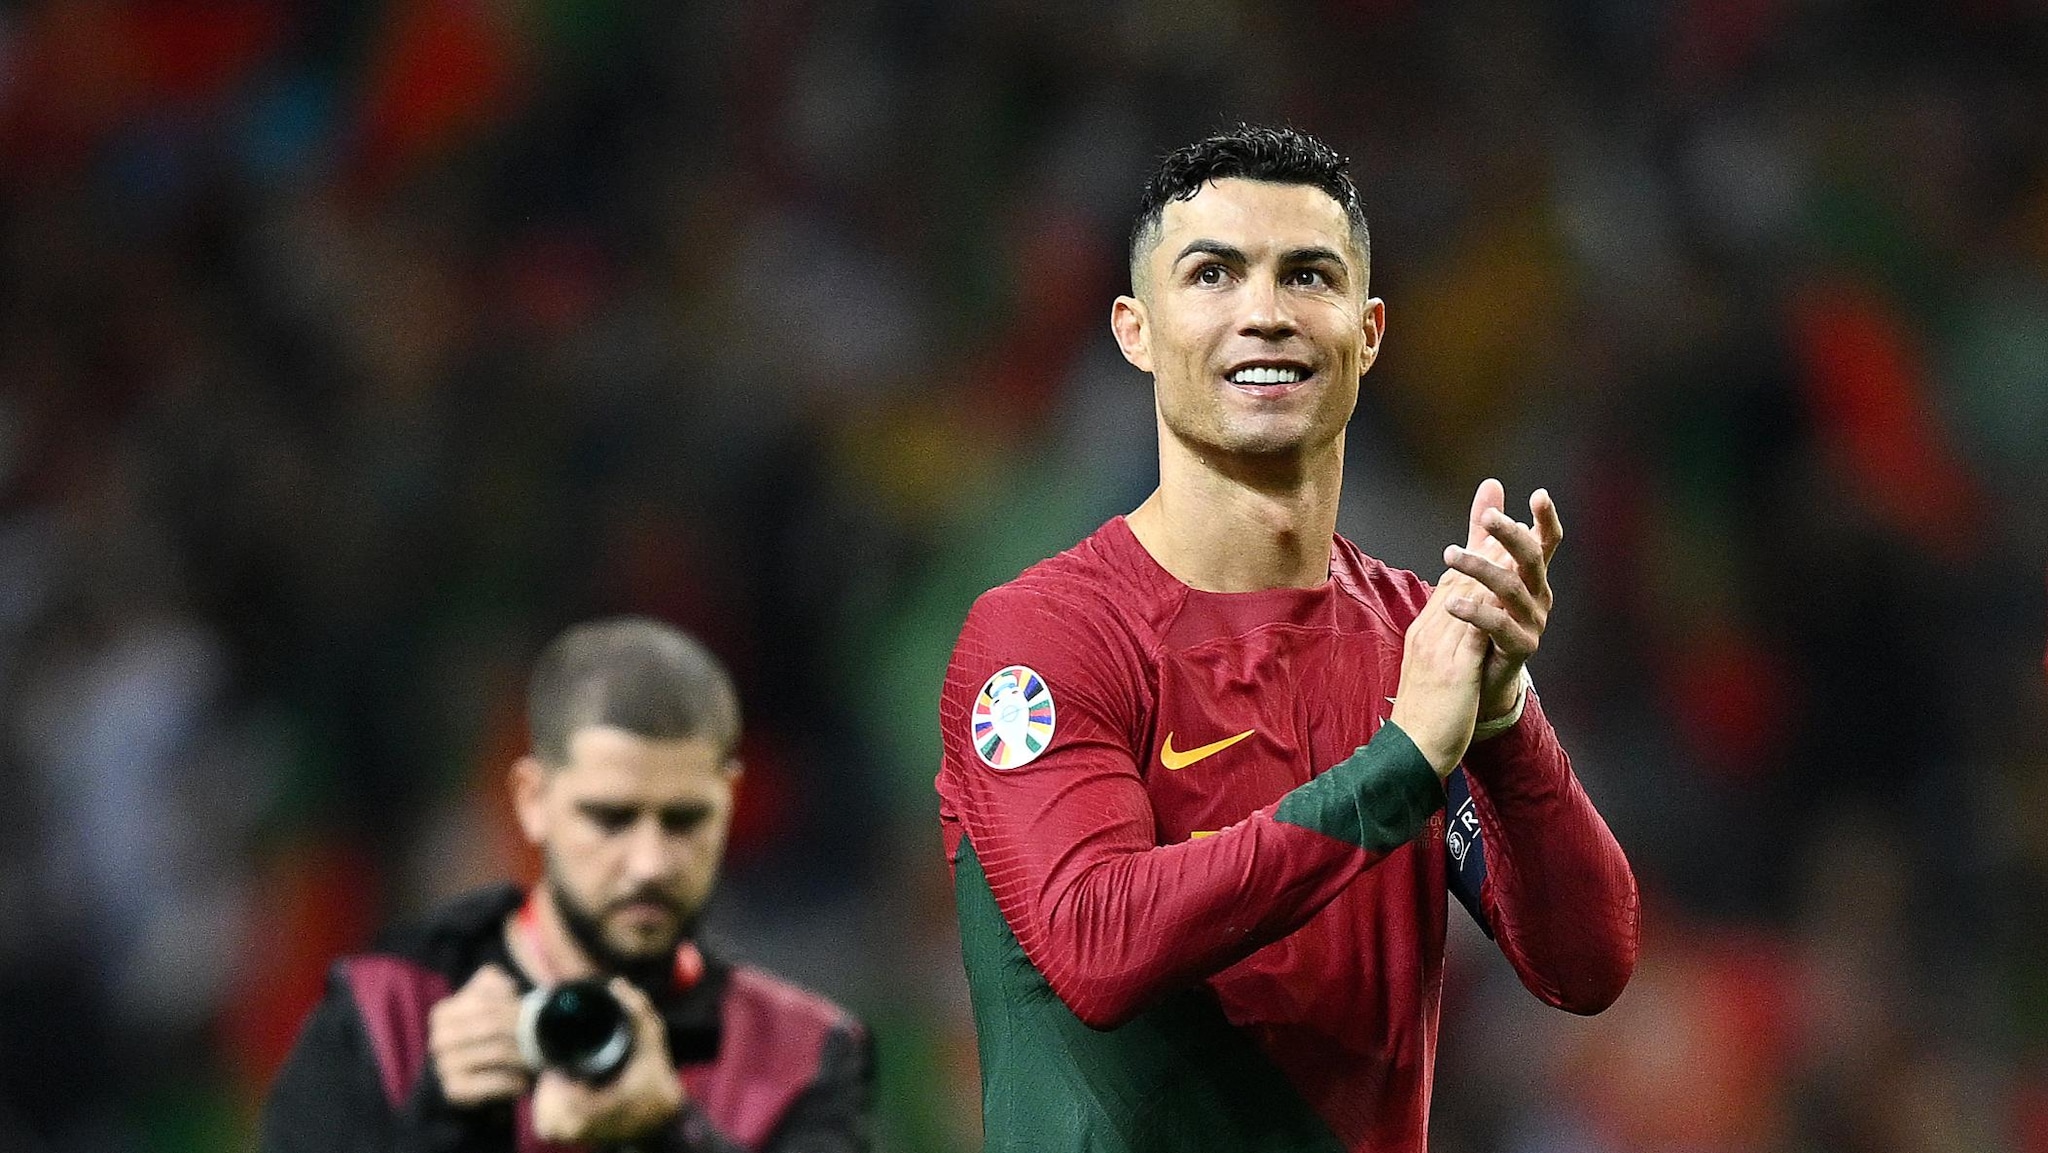 Cristiano Ronaldo is the best player in the world, but that goal